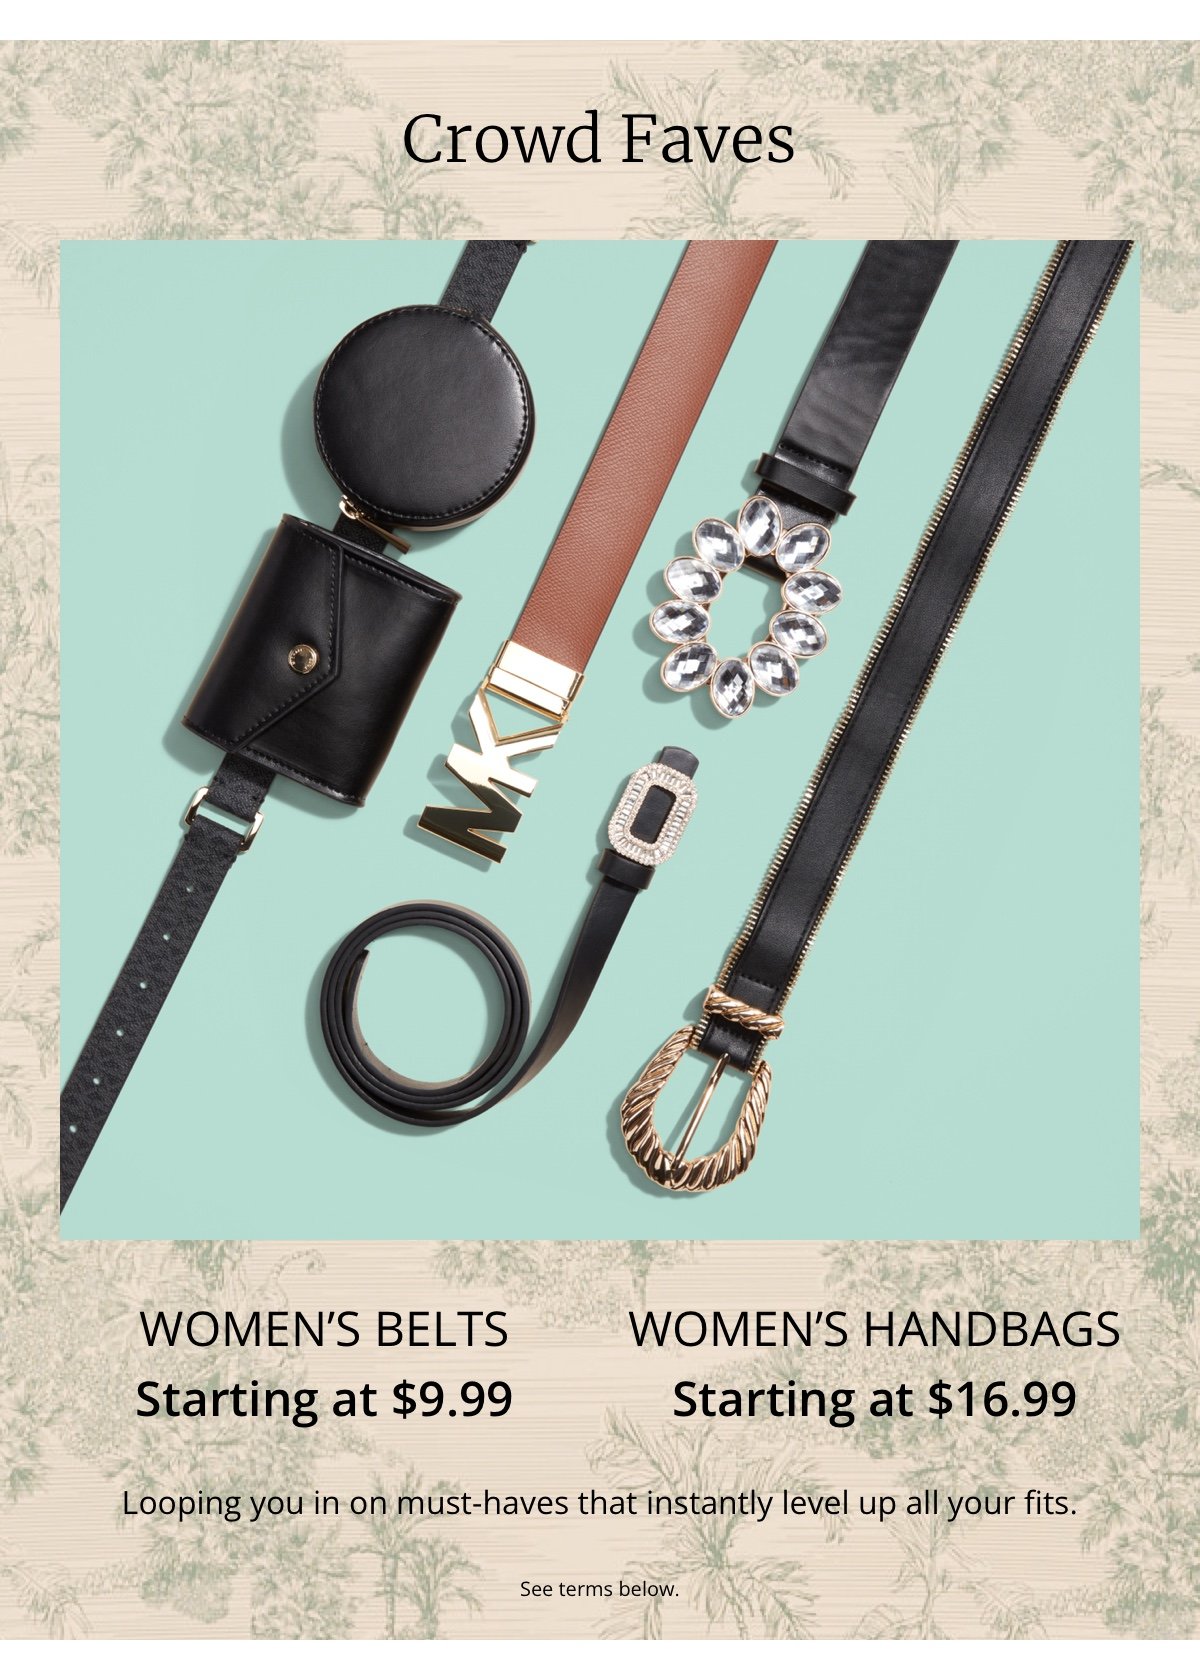 Crowd Faves|Women’s Belts|Starting at \\$9.99|Women’s Handbags|Starting at \\$16.99|Looping you in on must-haves that instantly level up all your fits.|See terms below.